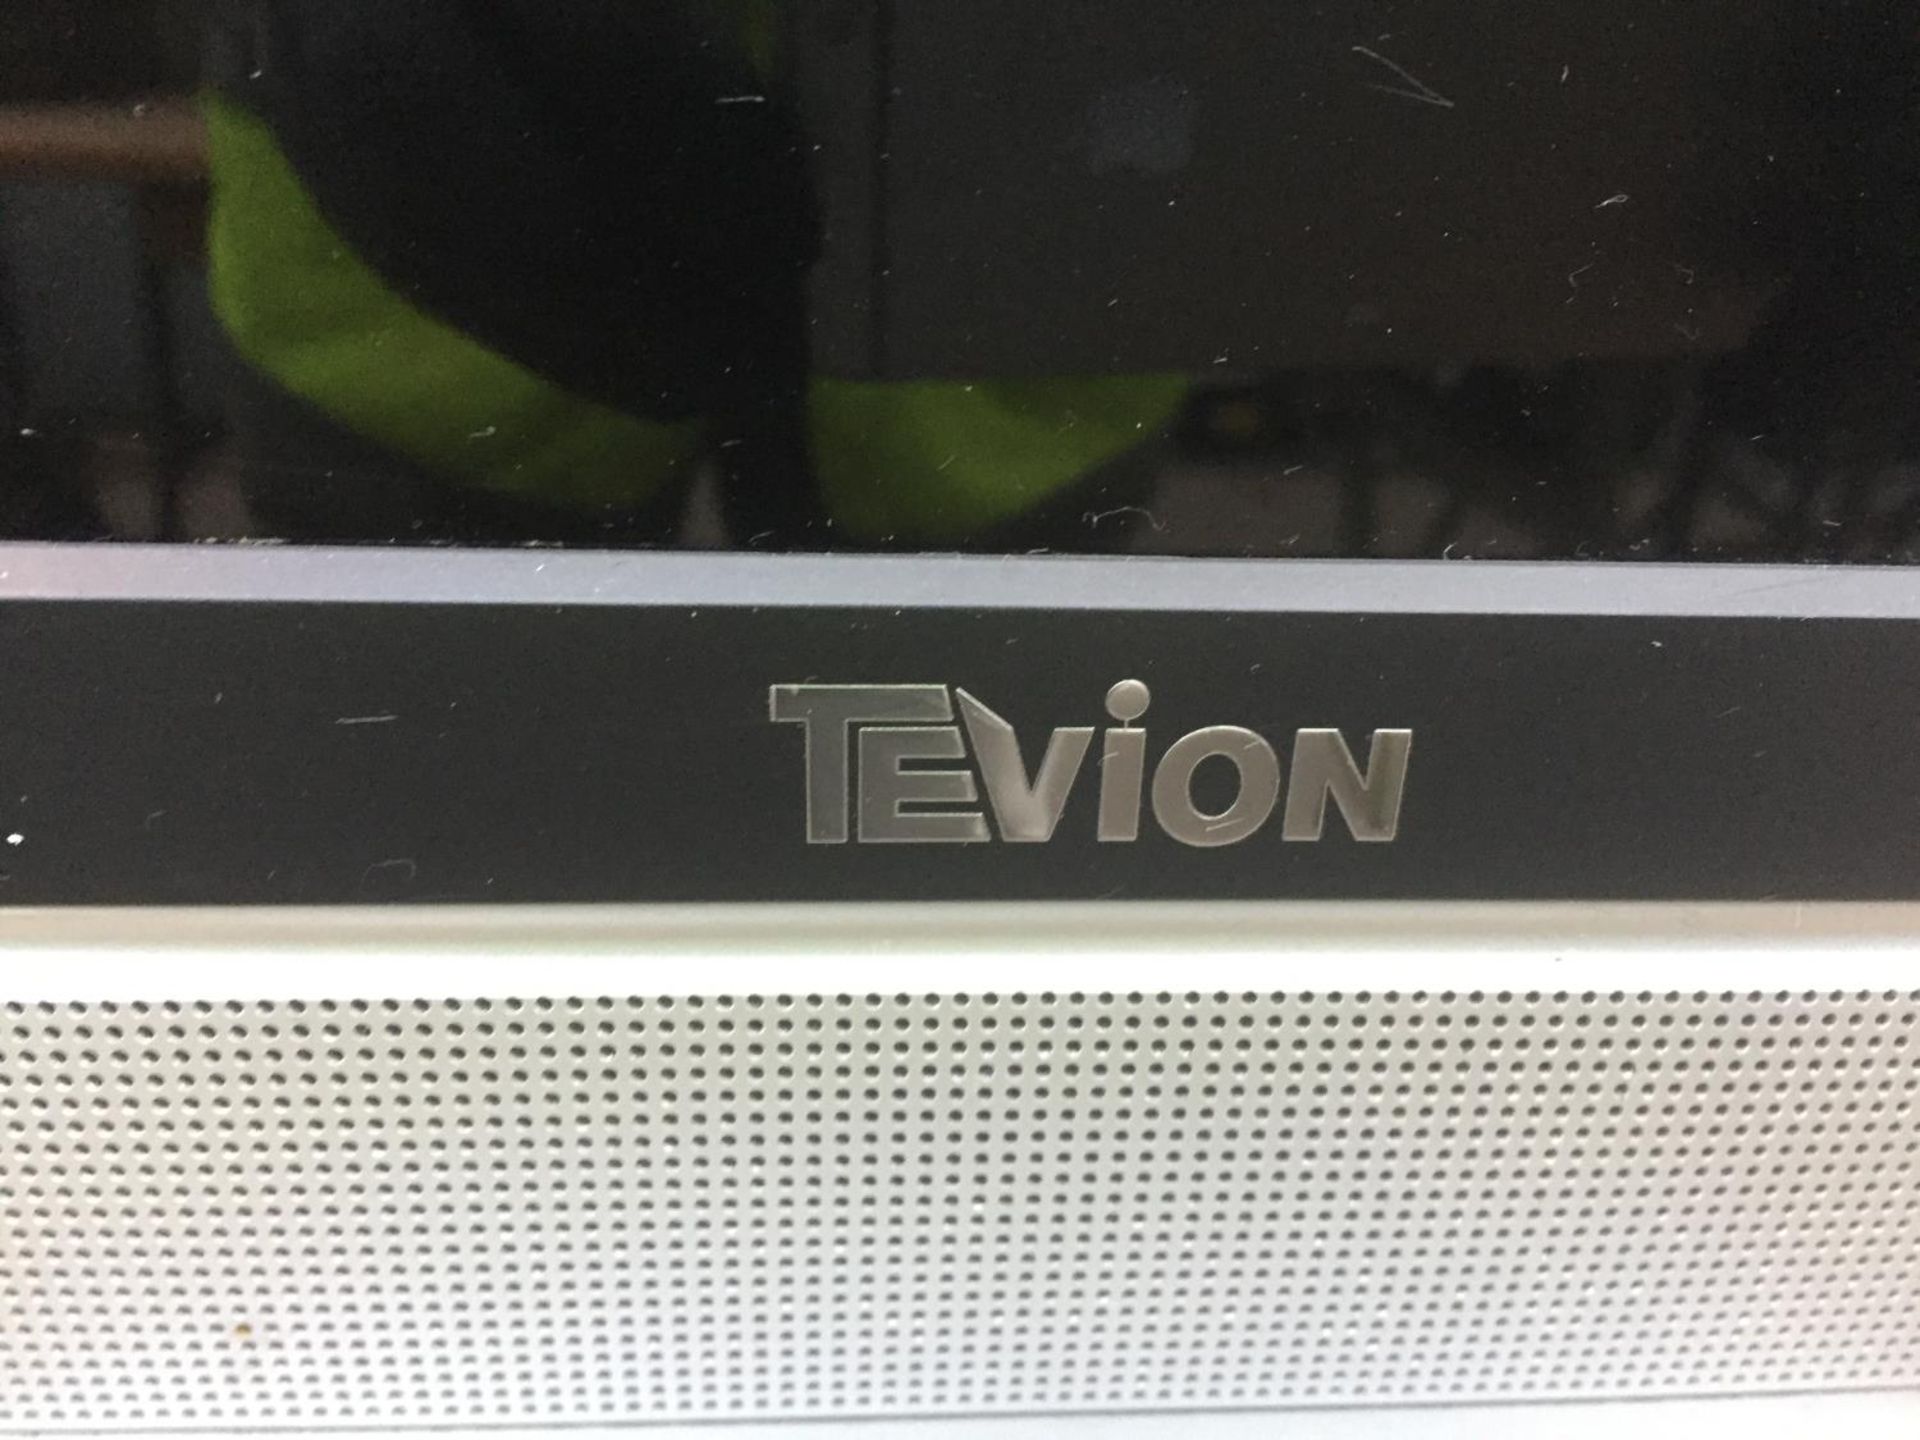 A 19" TEVION AND A 19" TECHNIKA TELEVISION - Image 2 of 4